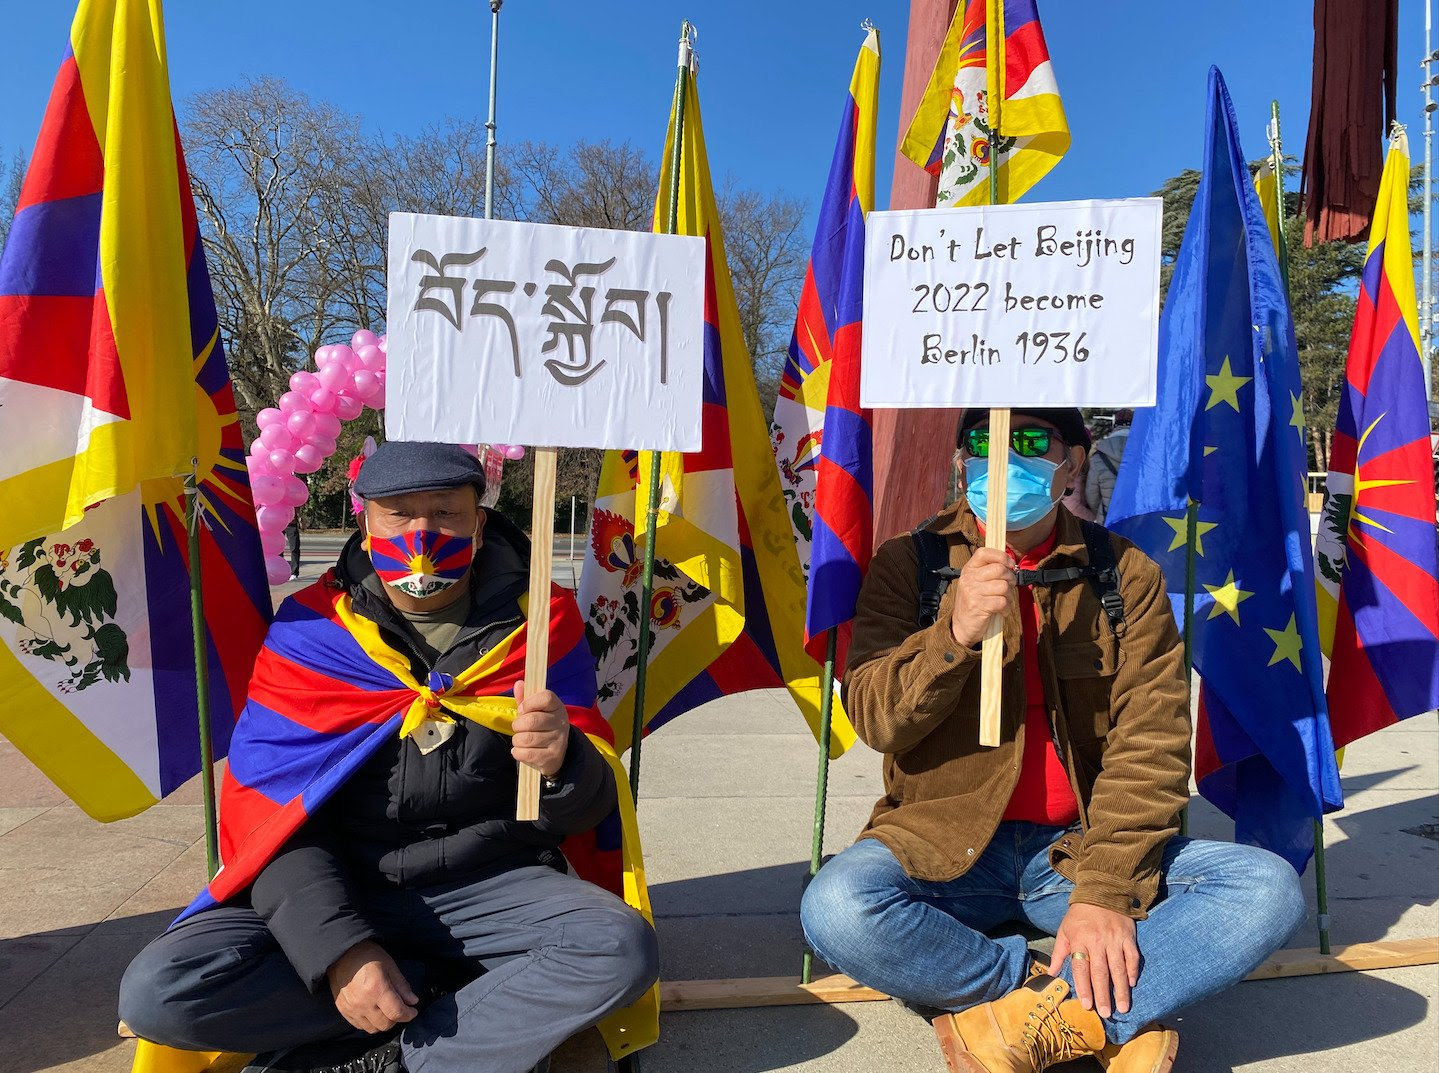 Screenshot 2022 02 14 at 9.36.24 AM Swiss-Tibetan Community of Geneva Section Hold Protest Against China’s Continued Occupation of Tibet